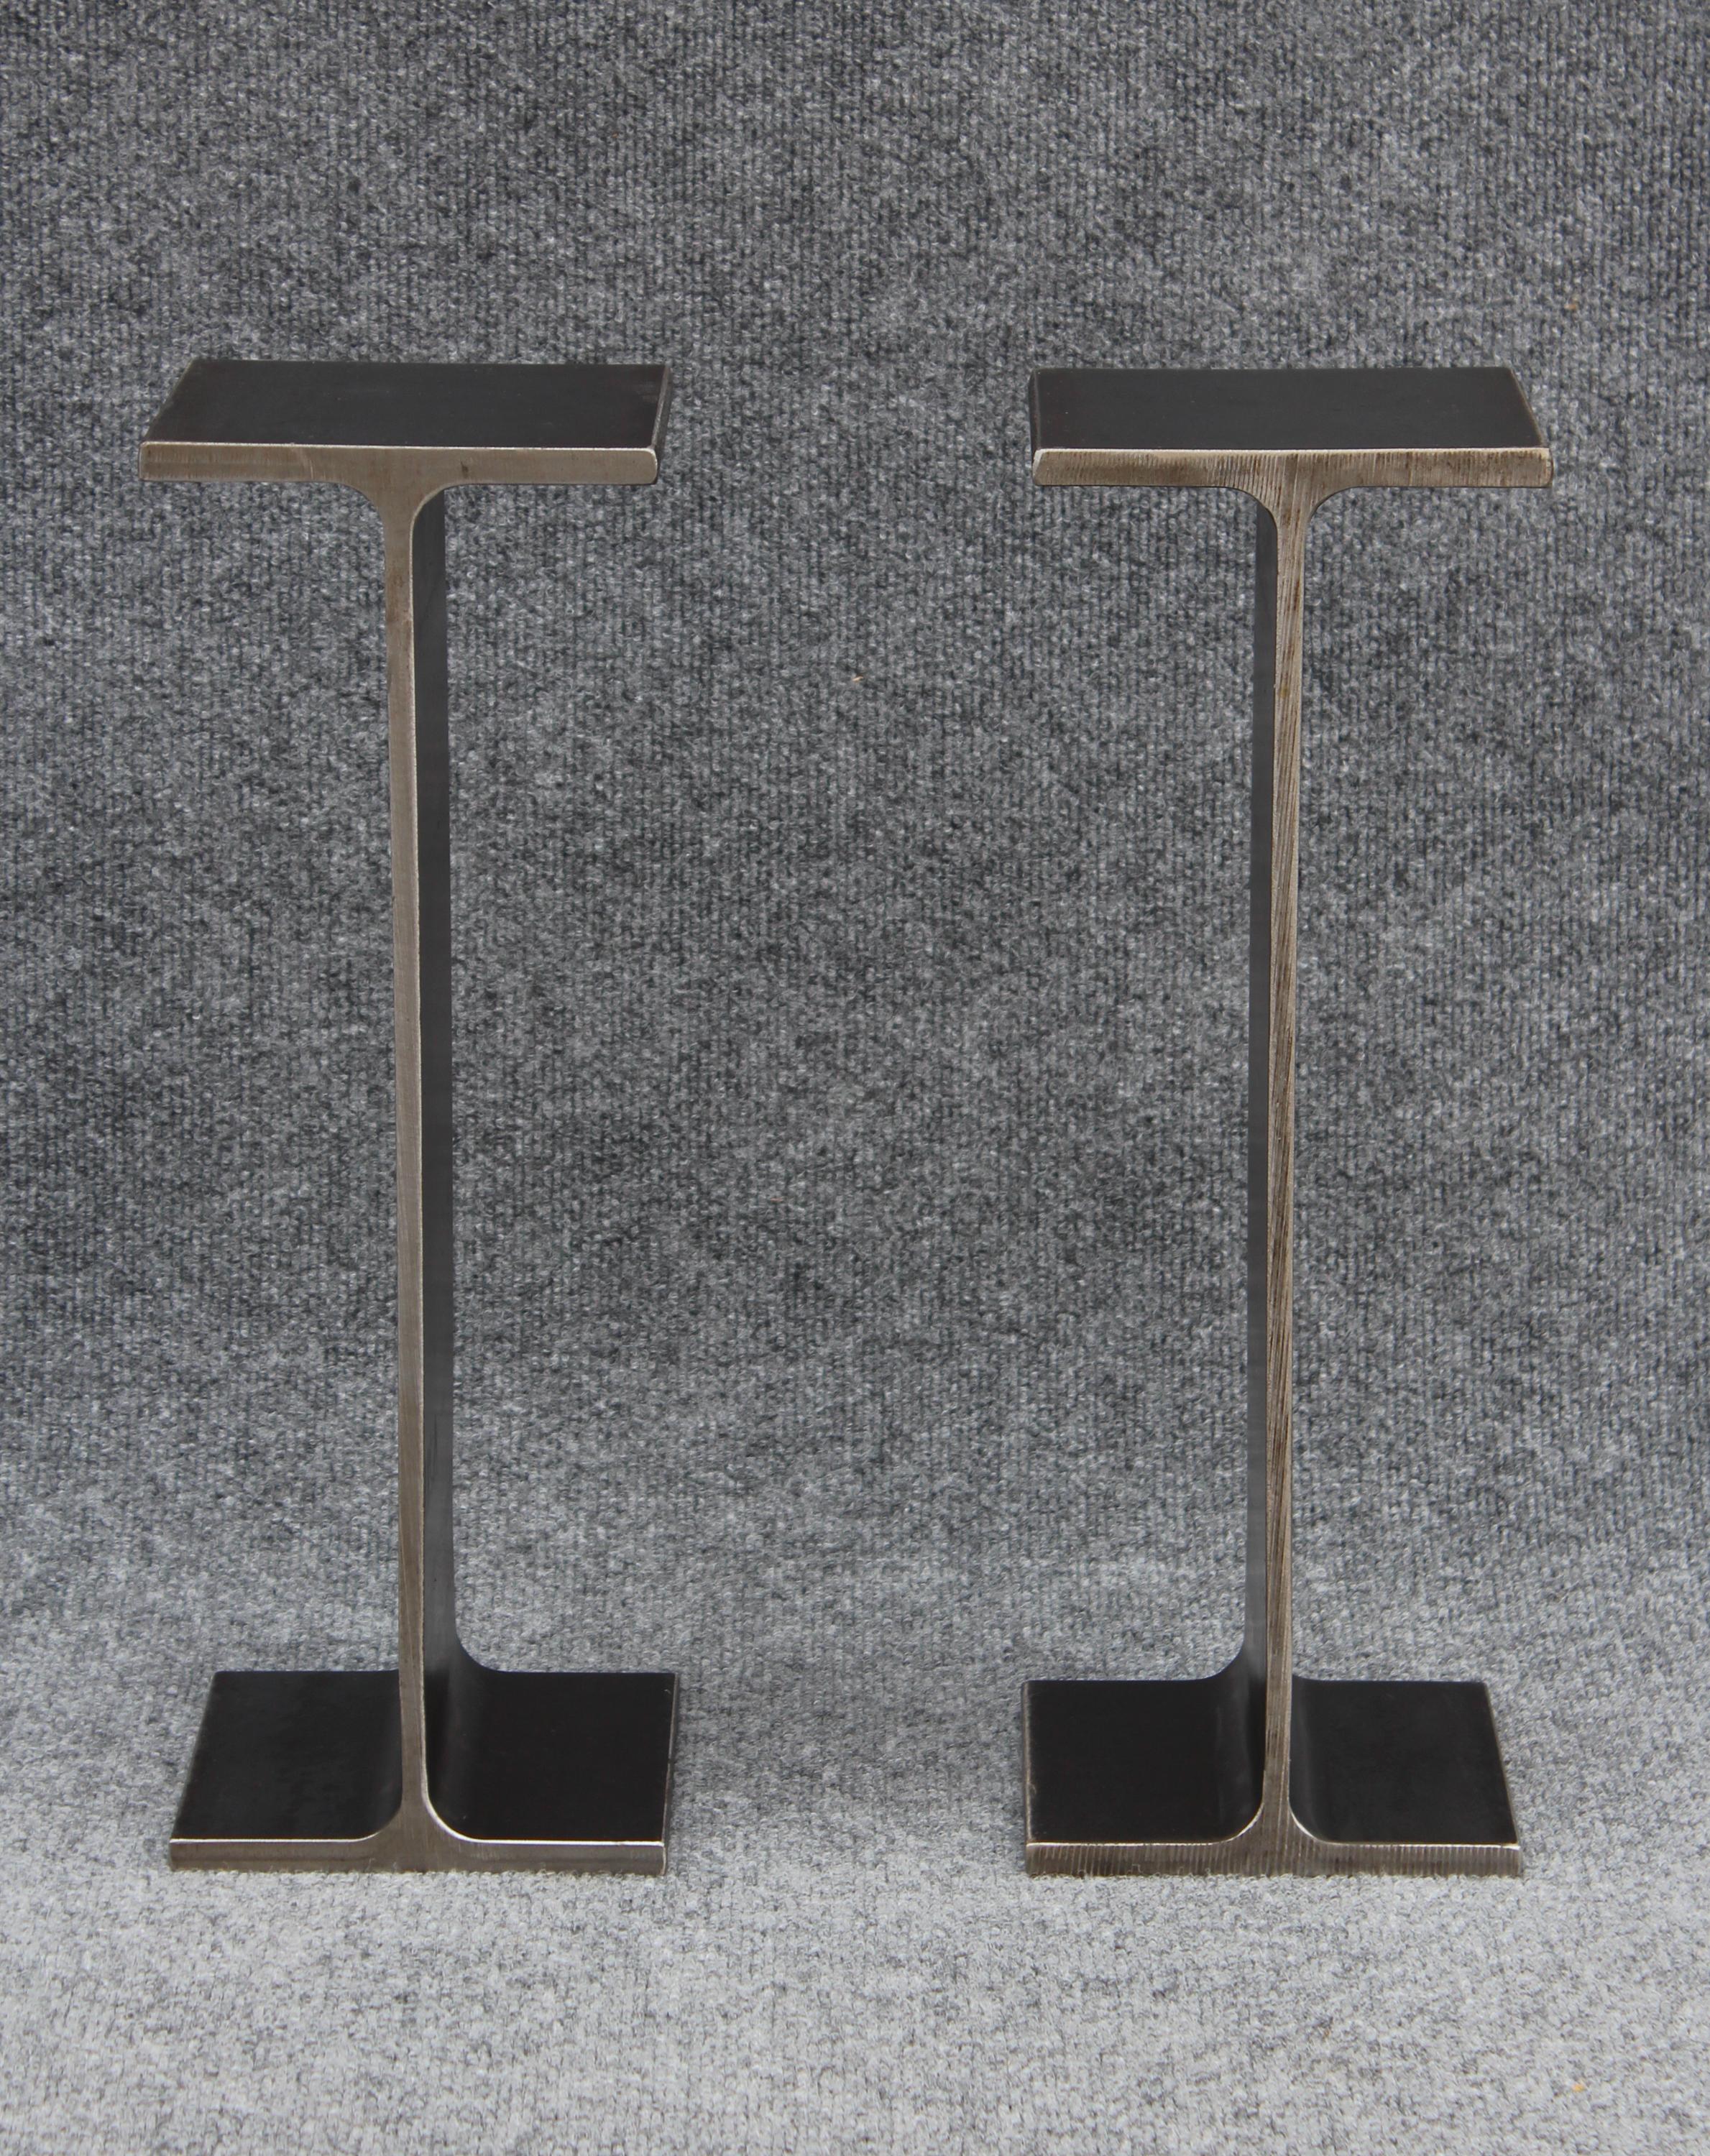 Ward Bennett Inspired Pair Enameled Steel I-Beam Drink Stands or End Tables  In Good Condition For Sale In Philadelphia, PA